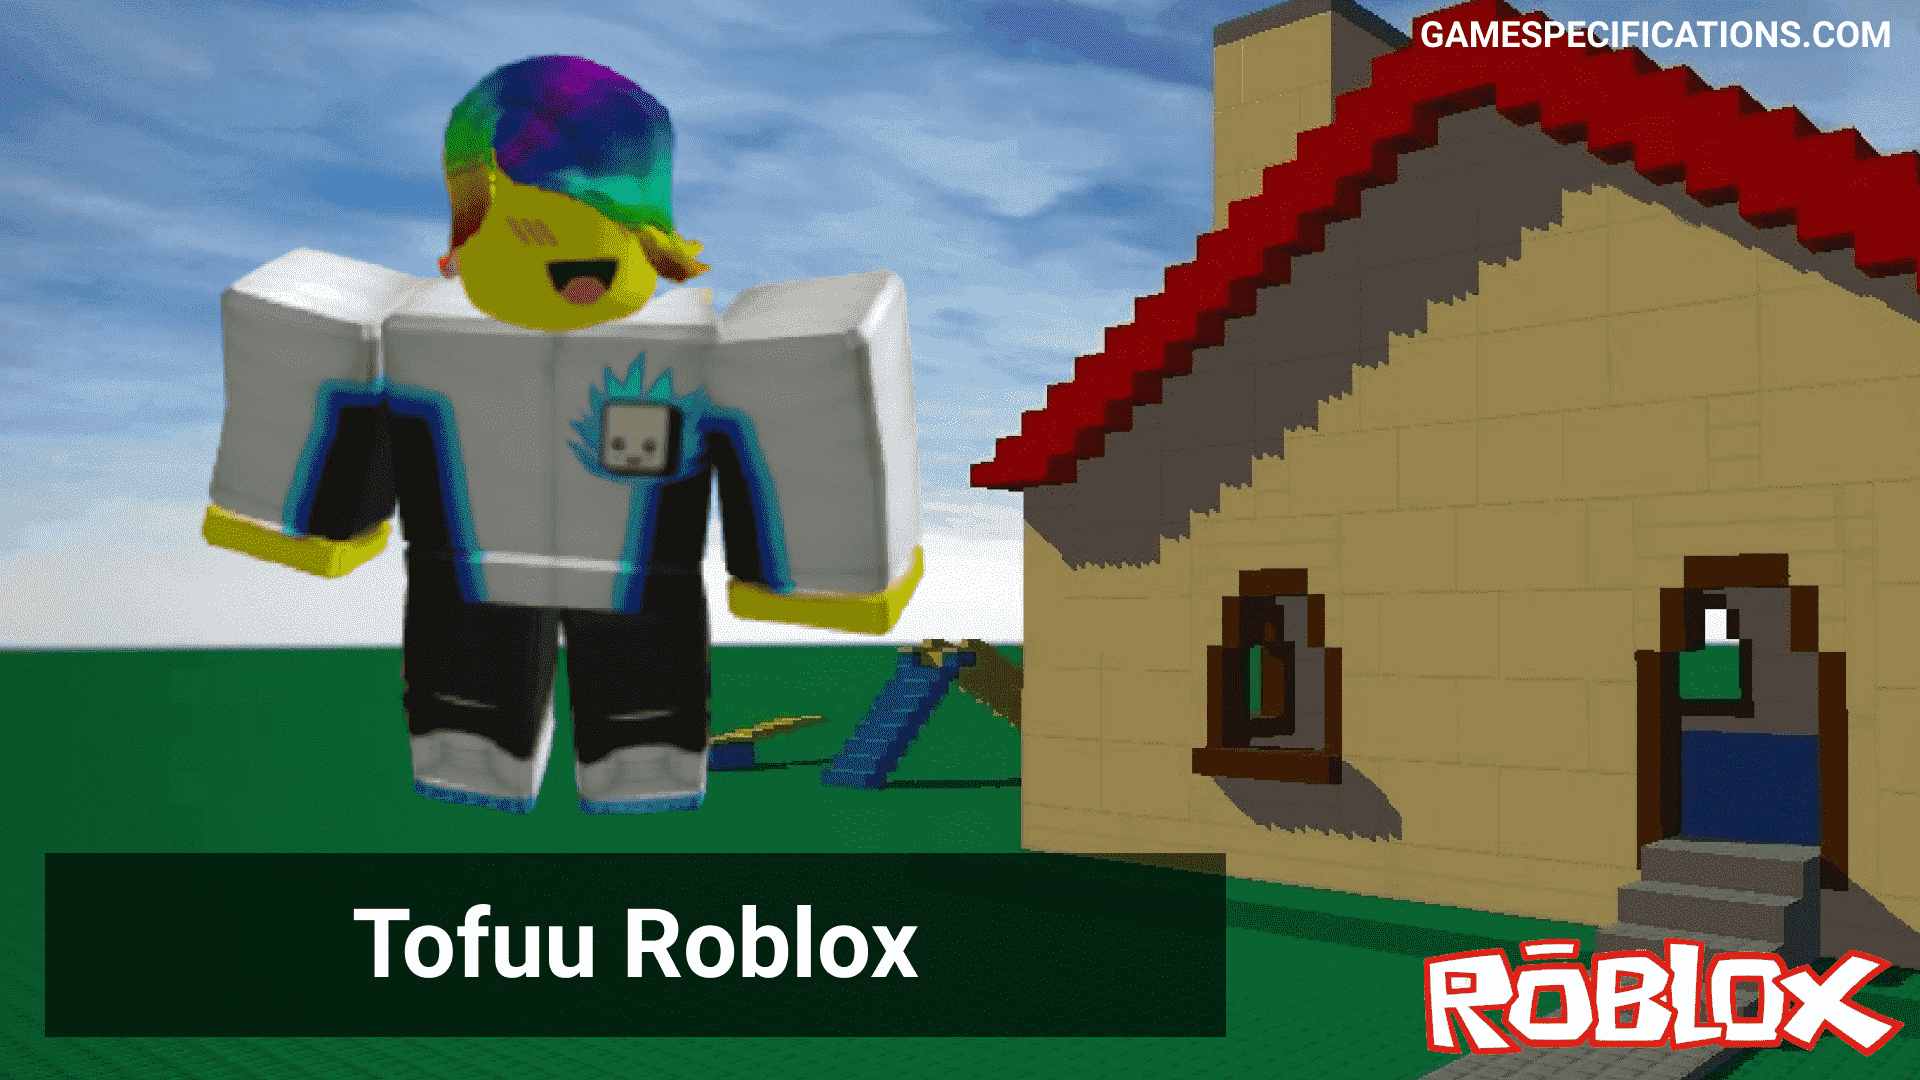 Tofuu Roblox’s Top 10 Videos That’ll Make Your Life Awesome